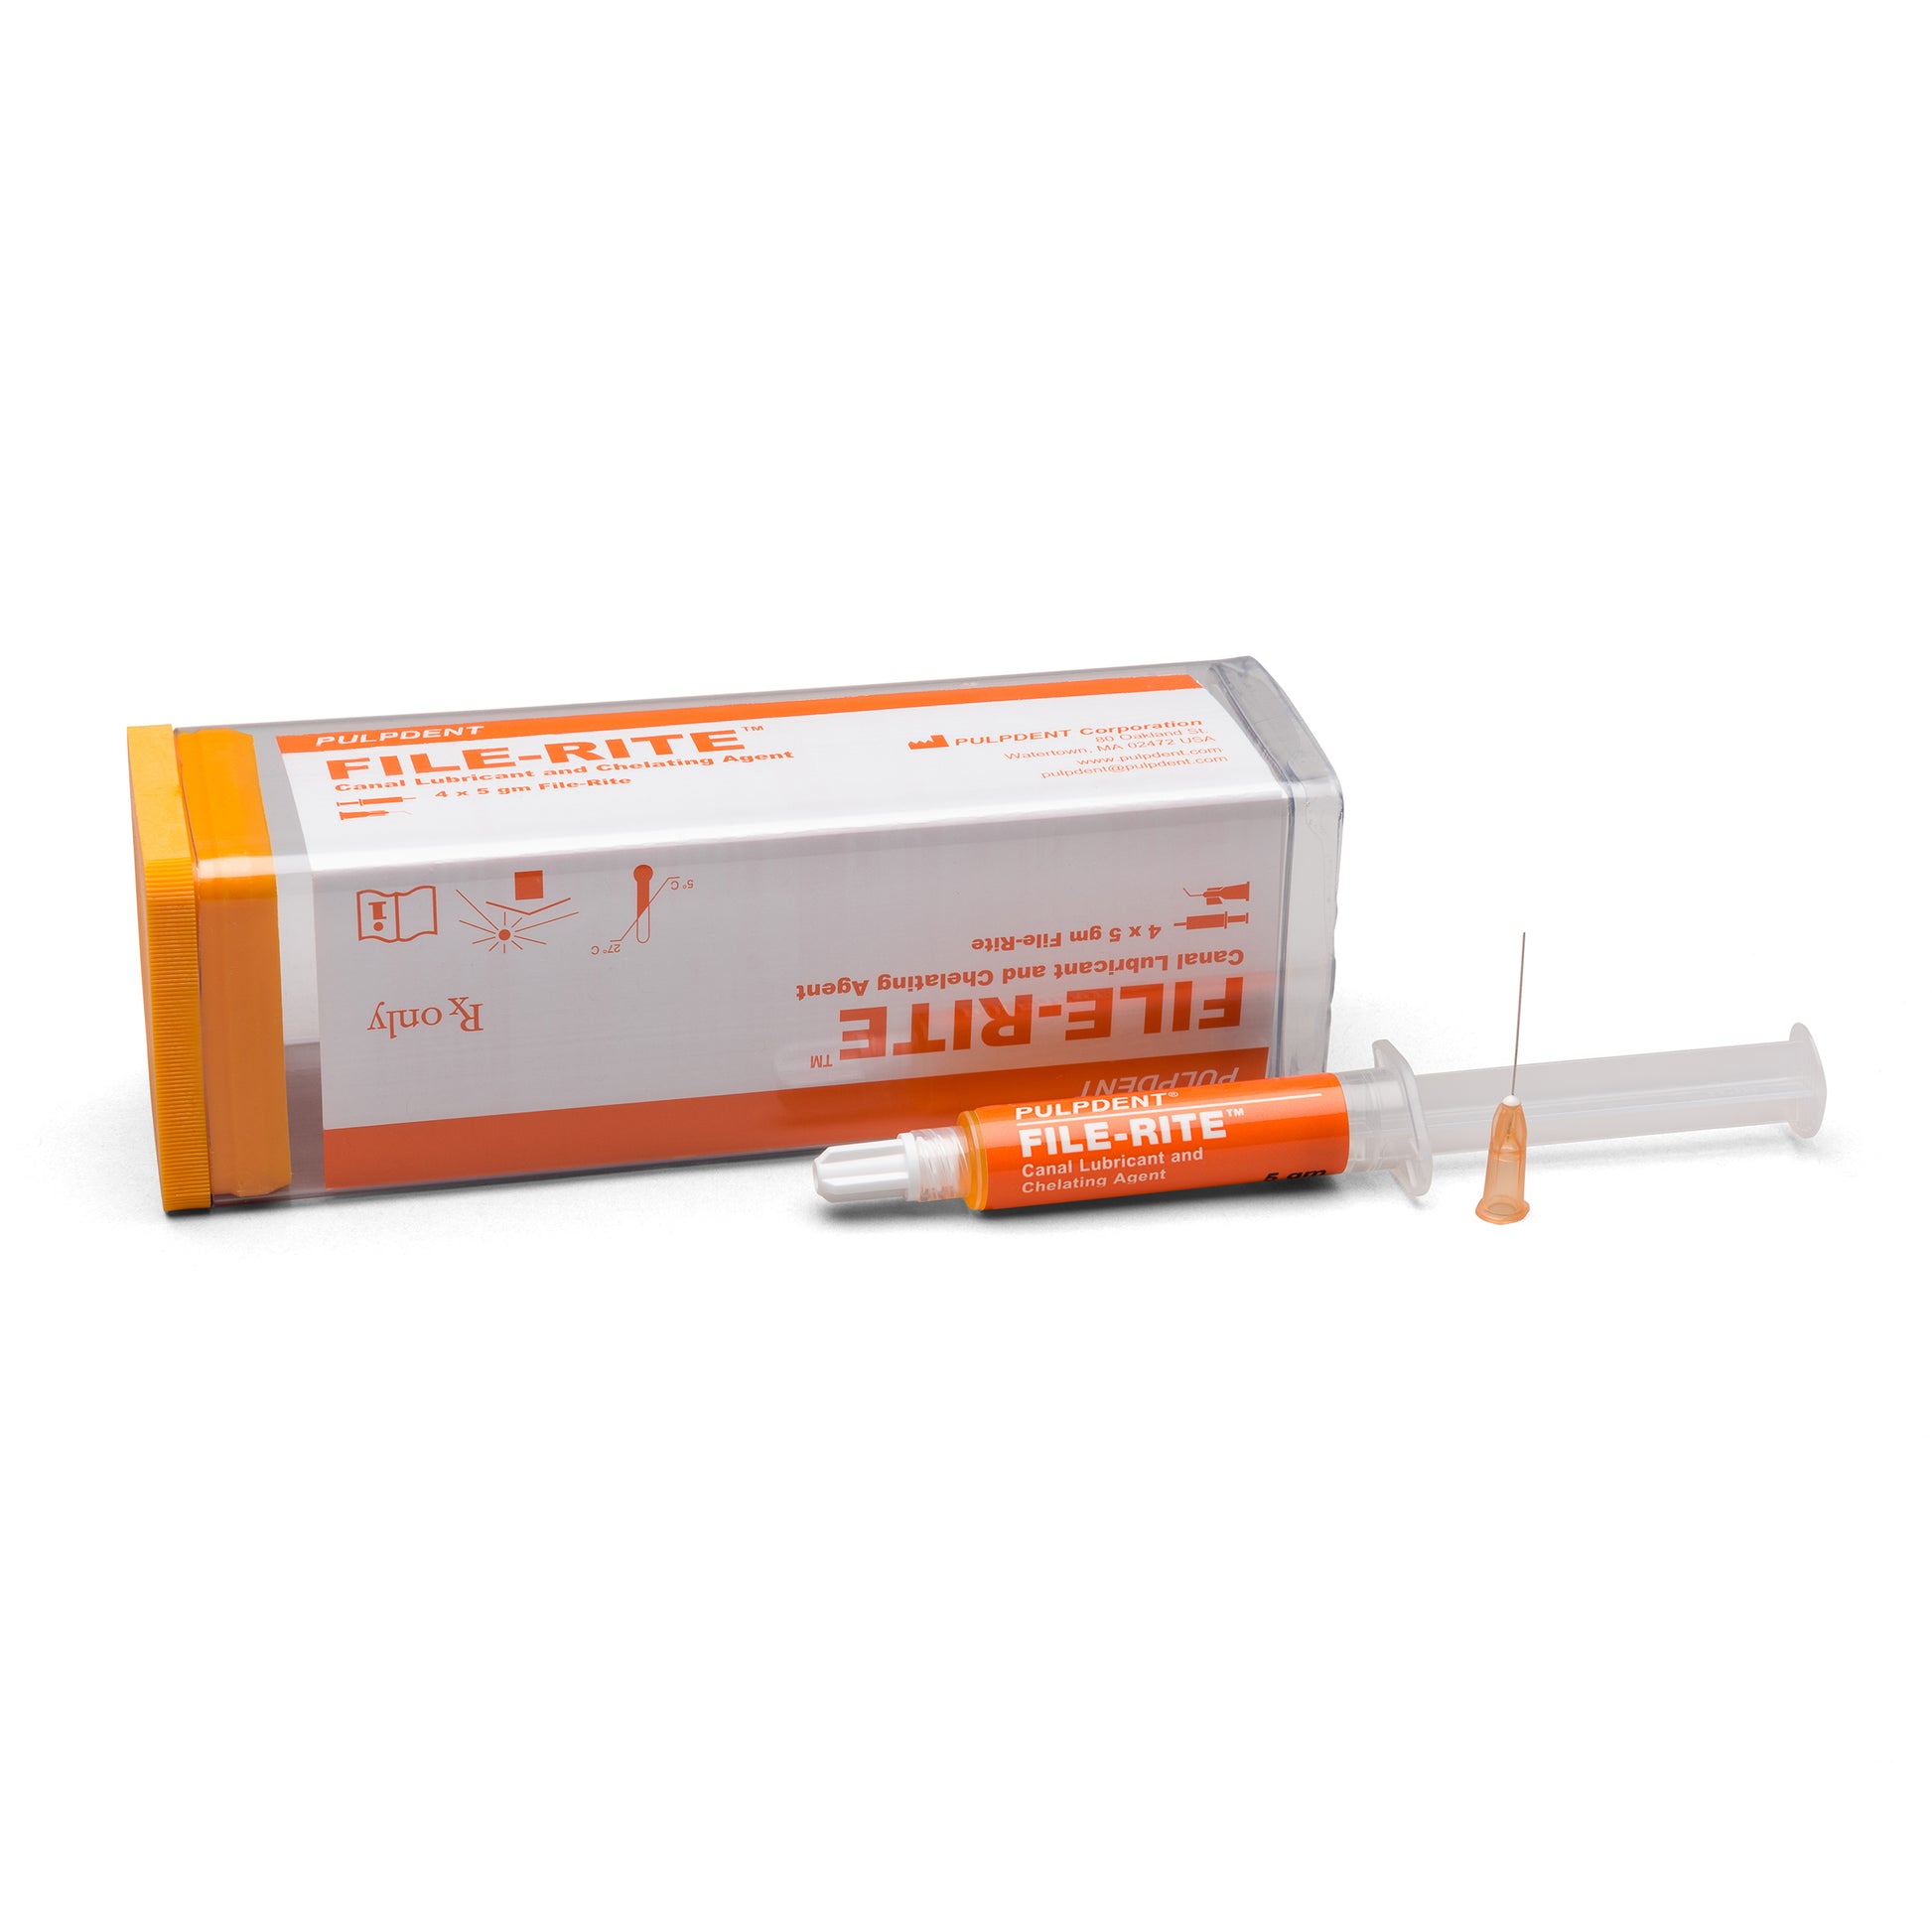 File-Rite - Canal Lubricant And Chelating Agent, KIT: 4 x 5 gm syringes File-Rite